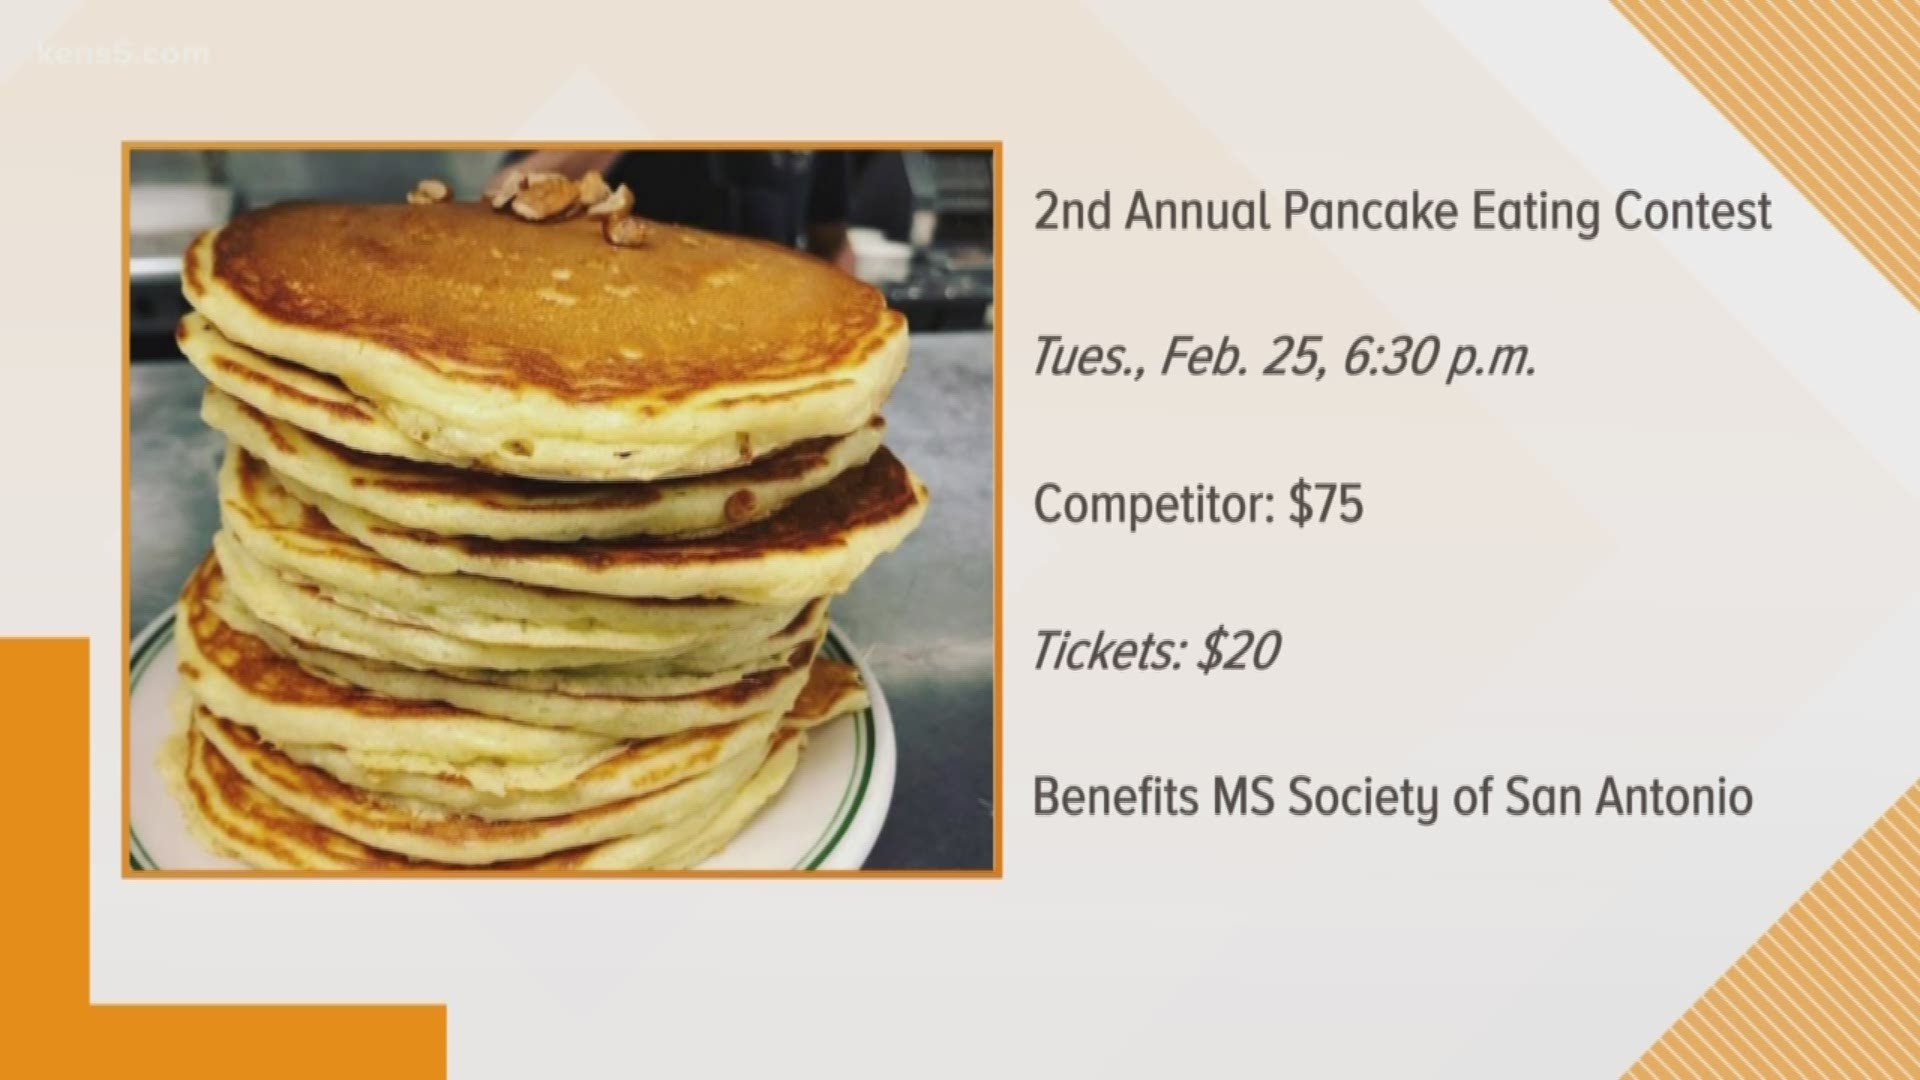 We're at Magnolia Pancake Haus with more on the contest that can fill you up, and help out a lot of people in San Antonio.